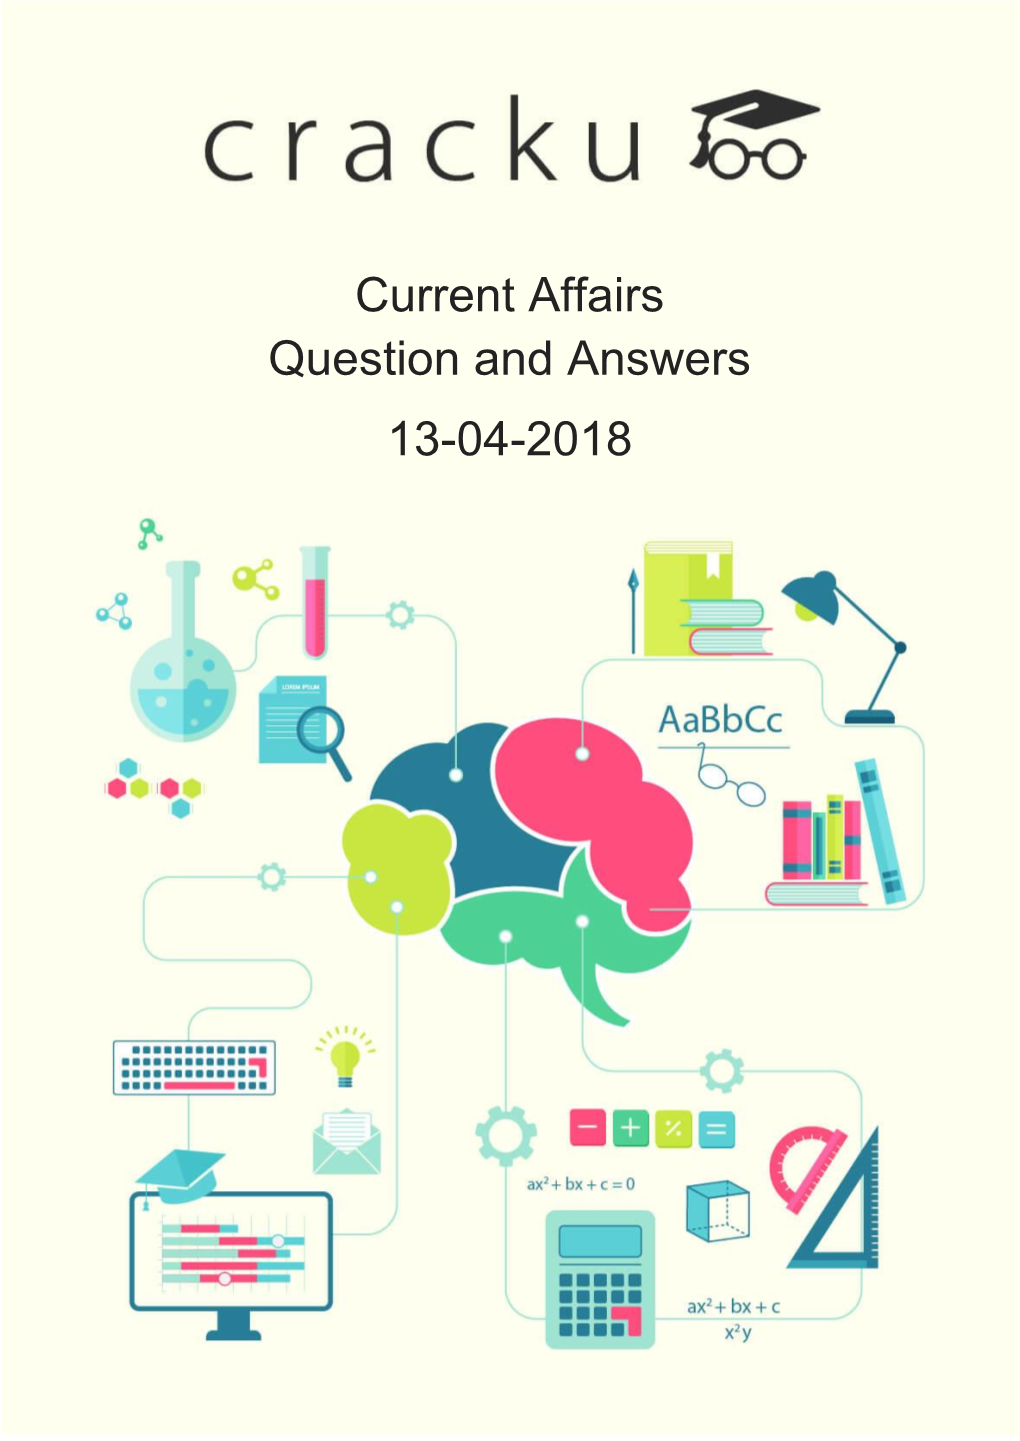 Current Affairs Question and Answers 13-04-2018